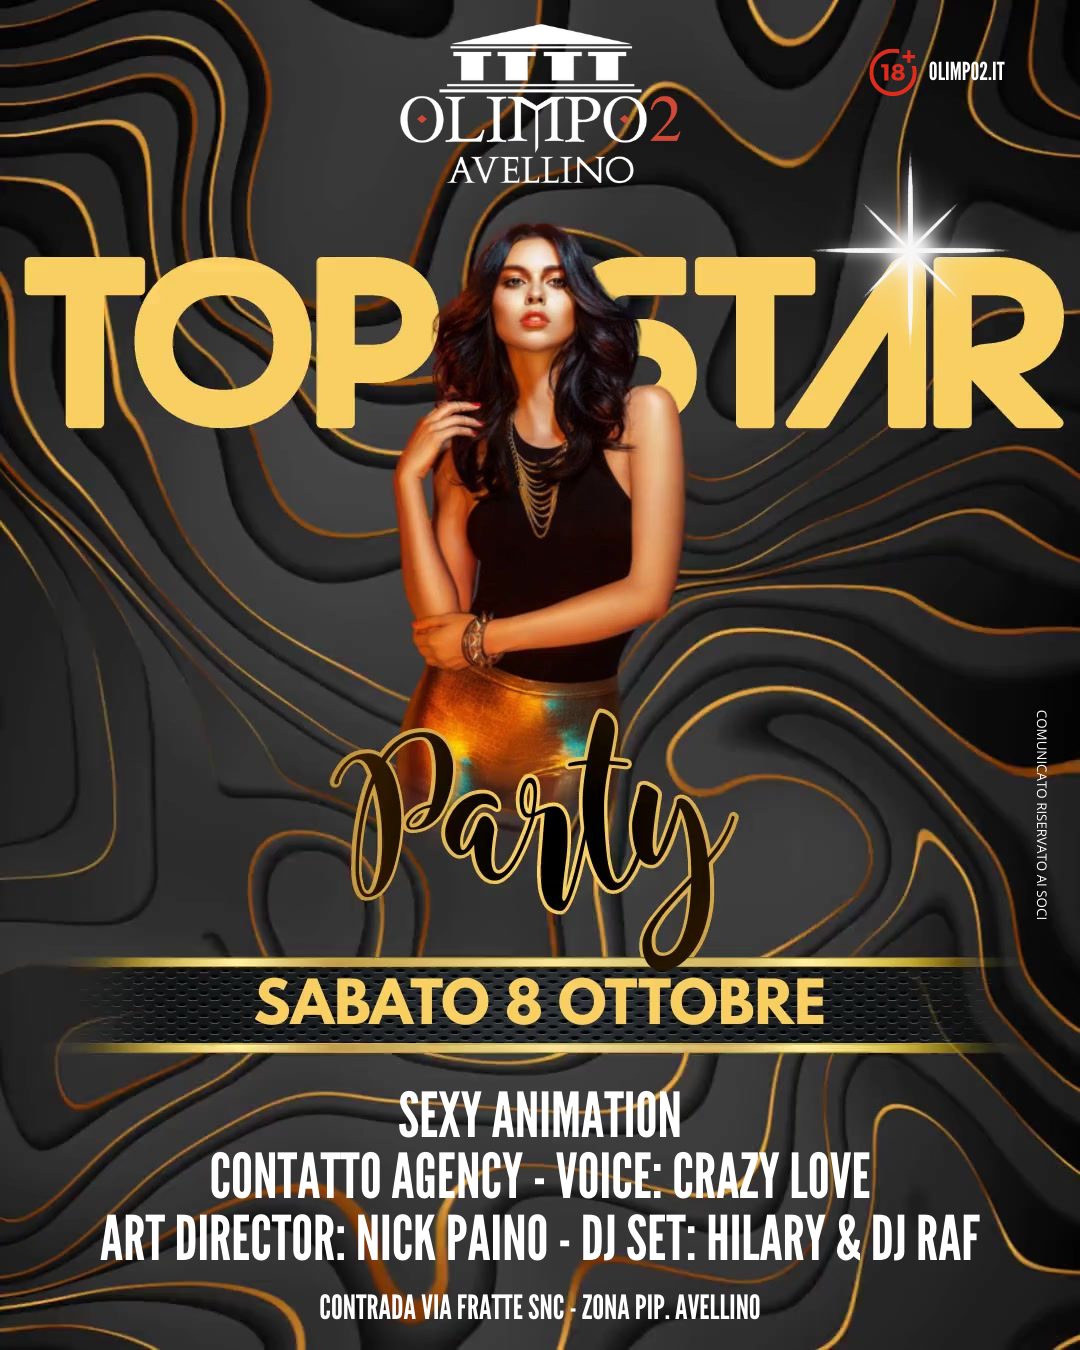 top star party olimpo 2 avellino